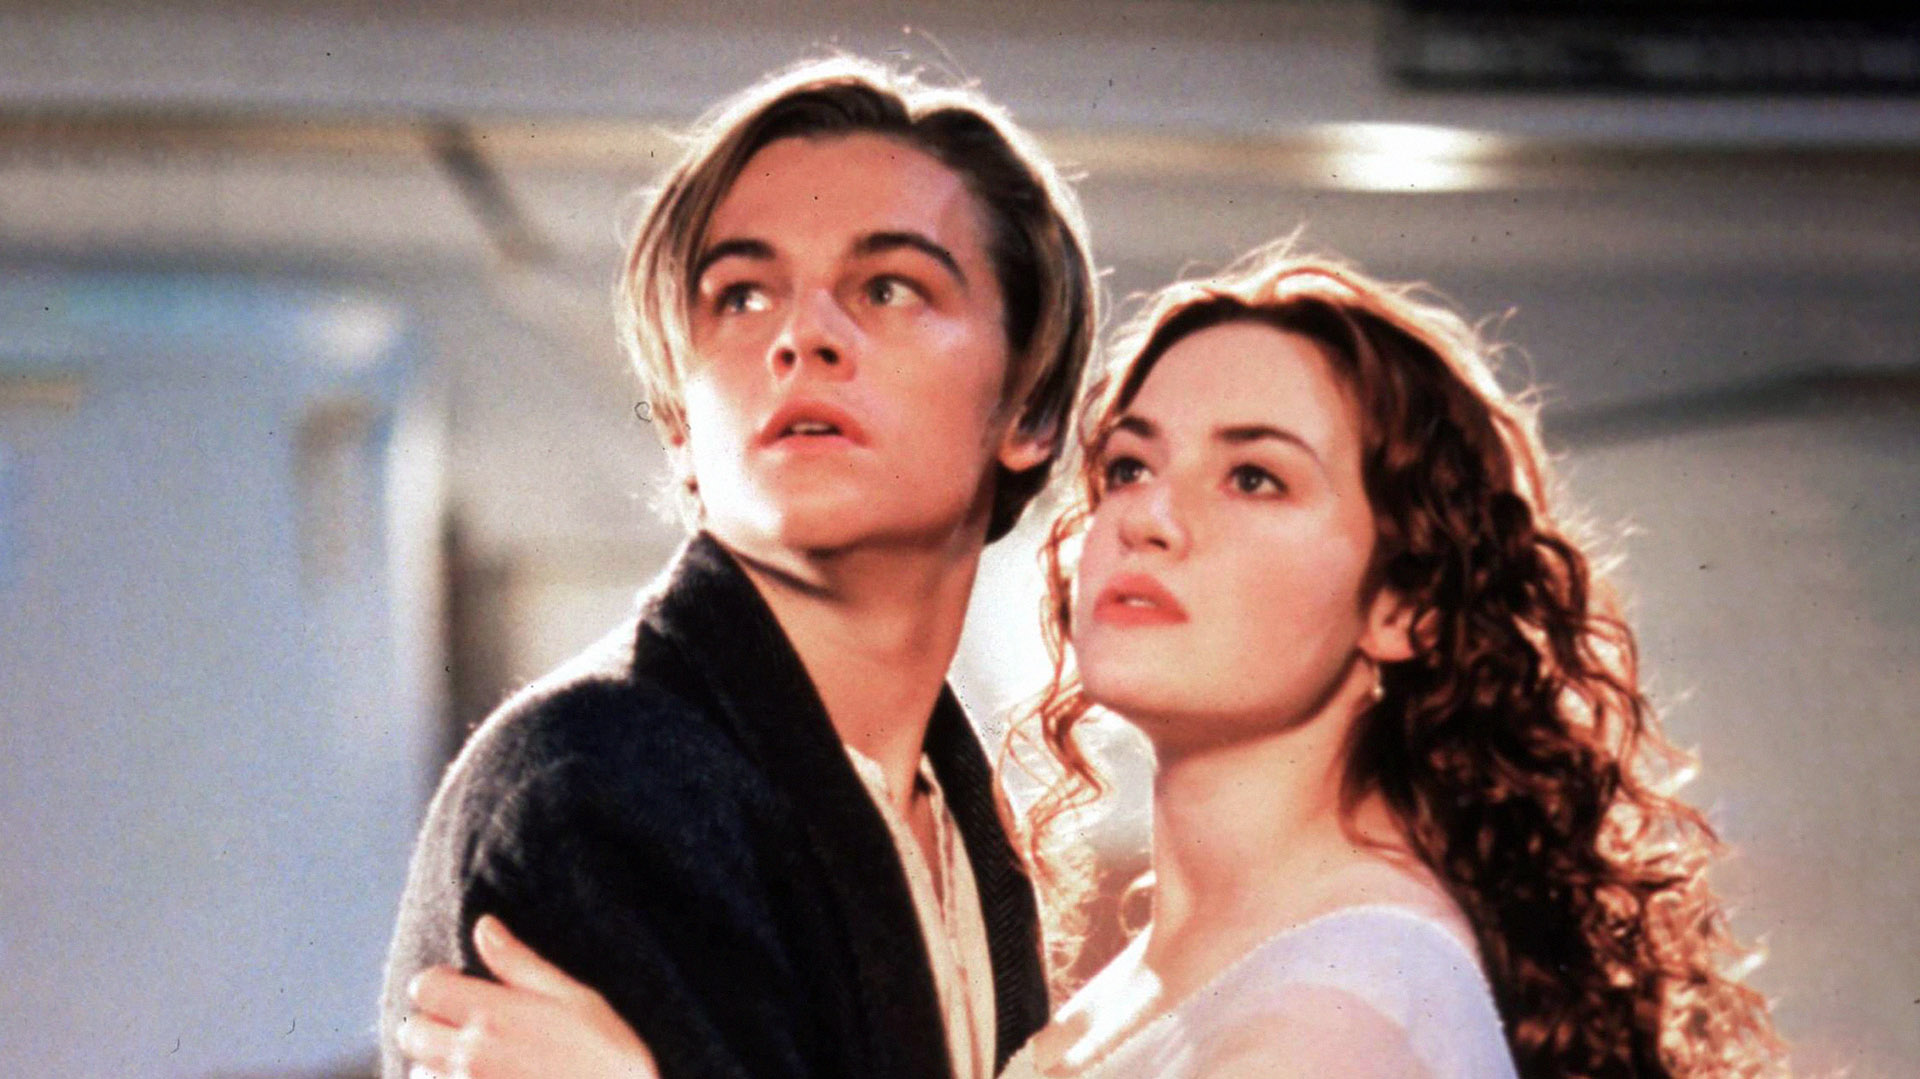 What Really Attracted Kate Winslet to Leonardo DiCaprio On Set of Titanic?